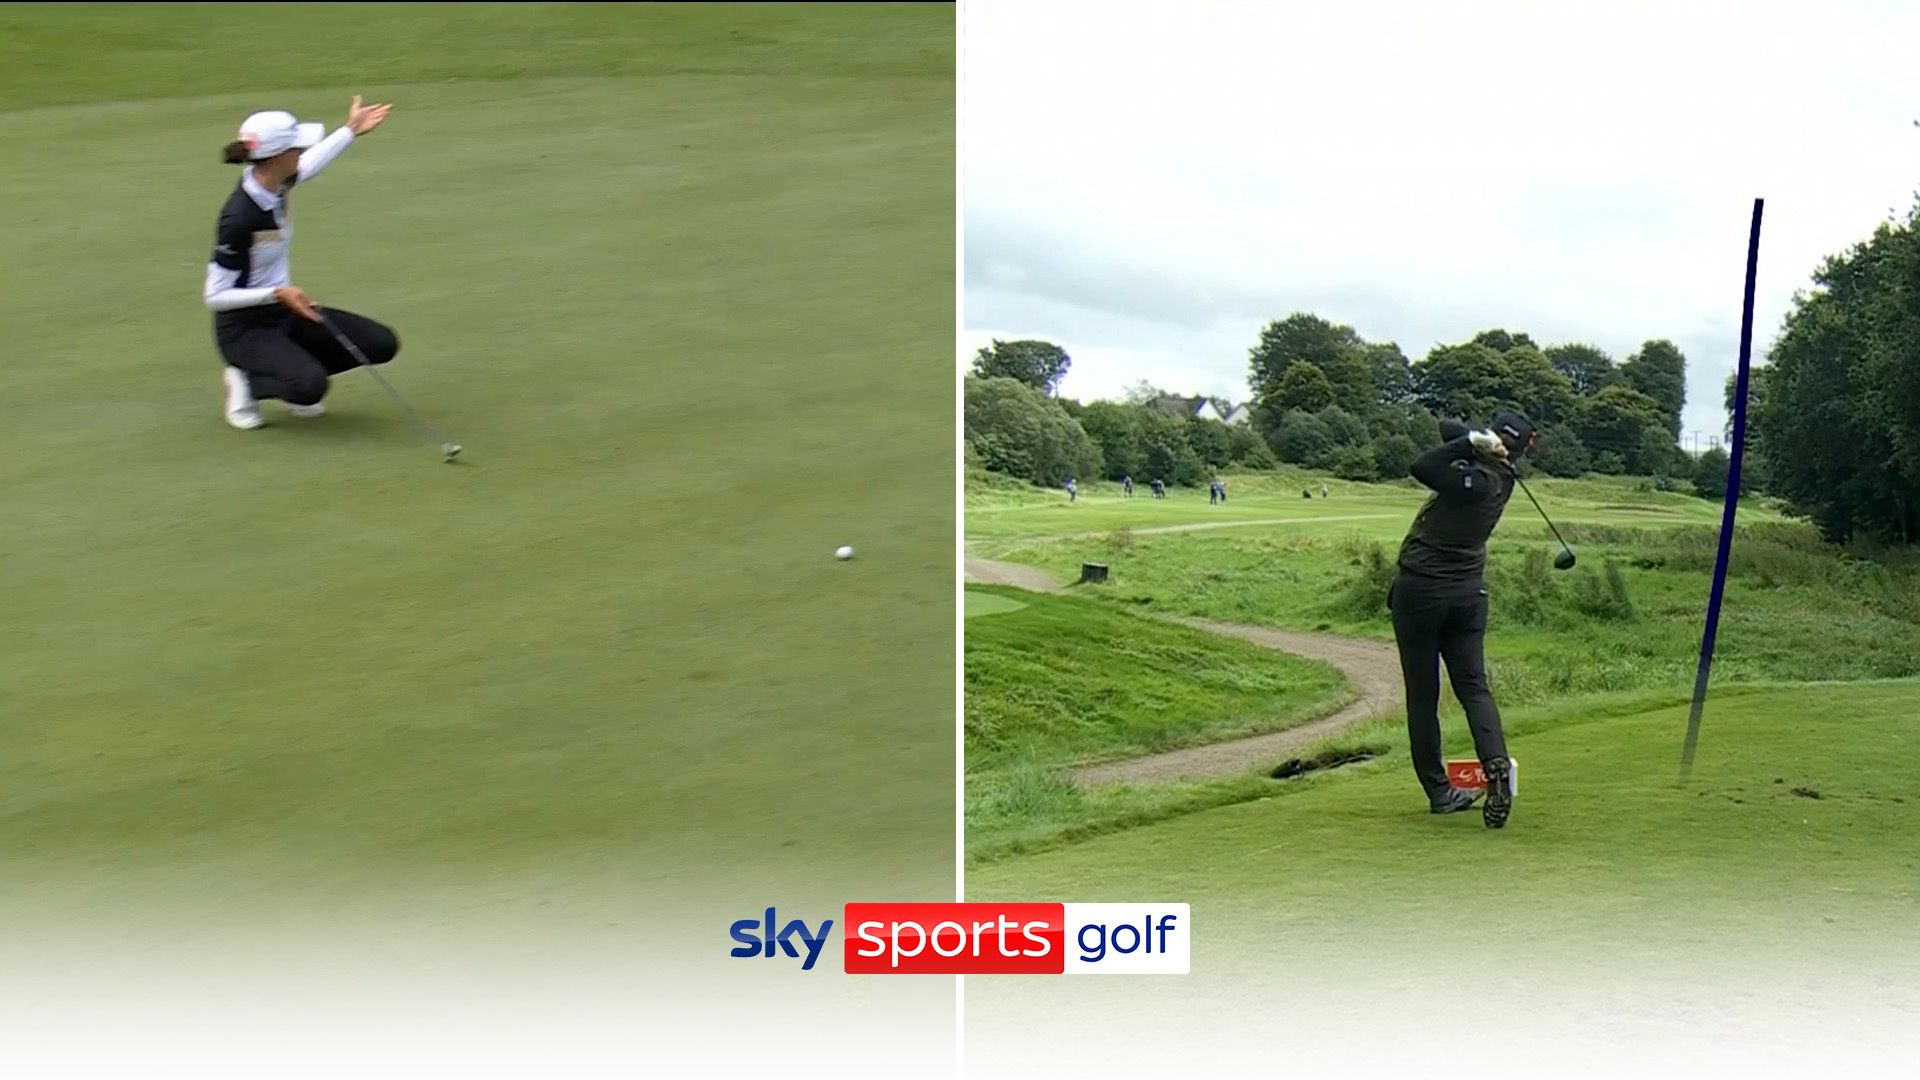 'That's extraordinary!' Booming drive narrowly misses player on green!